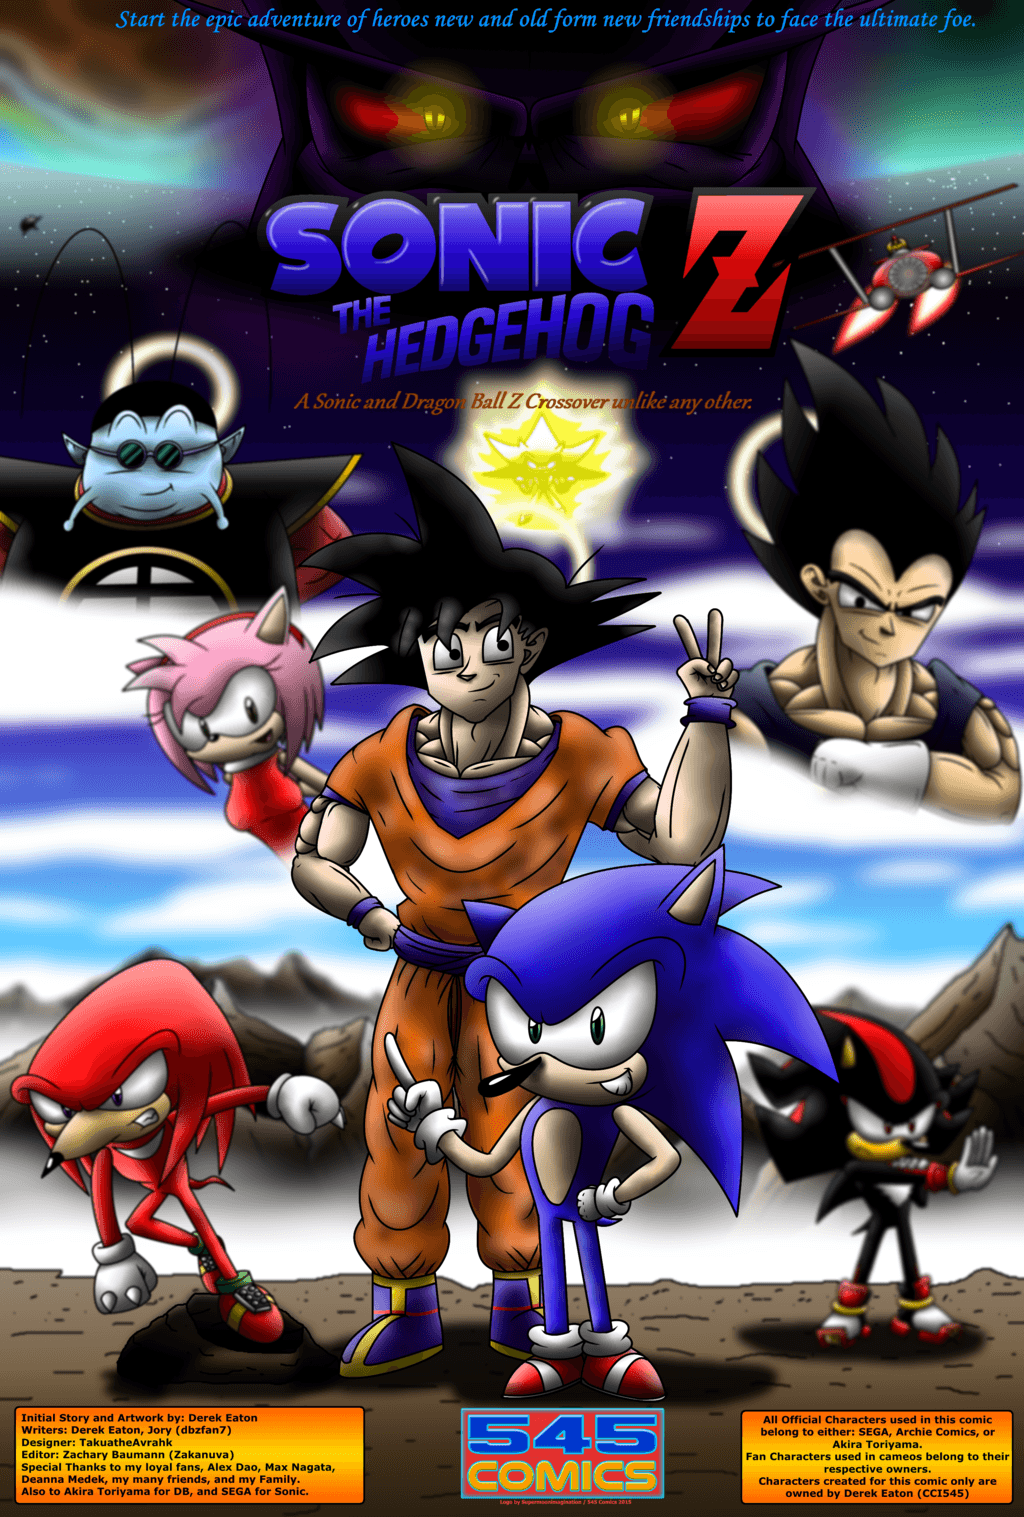 Sonic the Hedgehog Z Comic Cover 2015 logo added